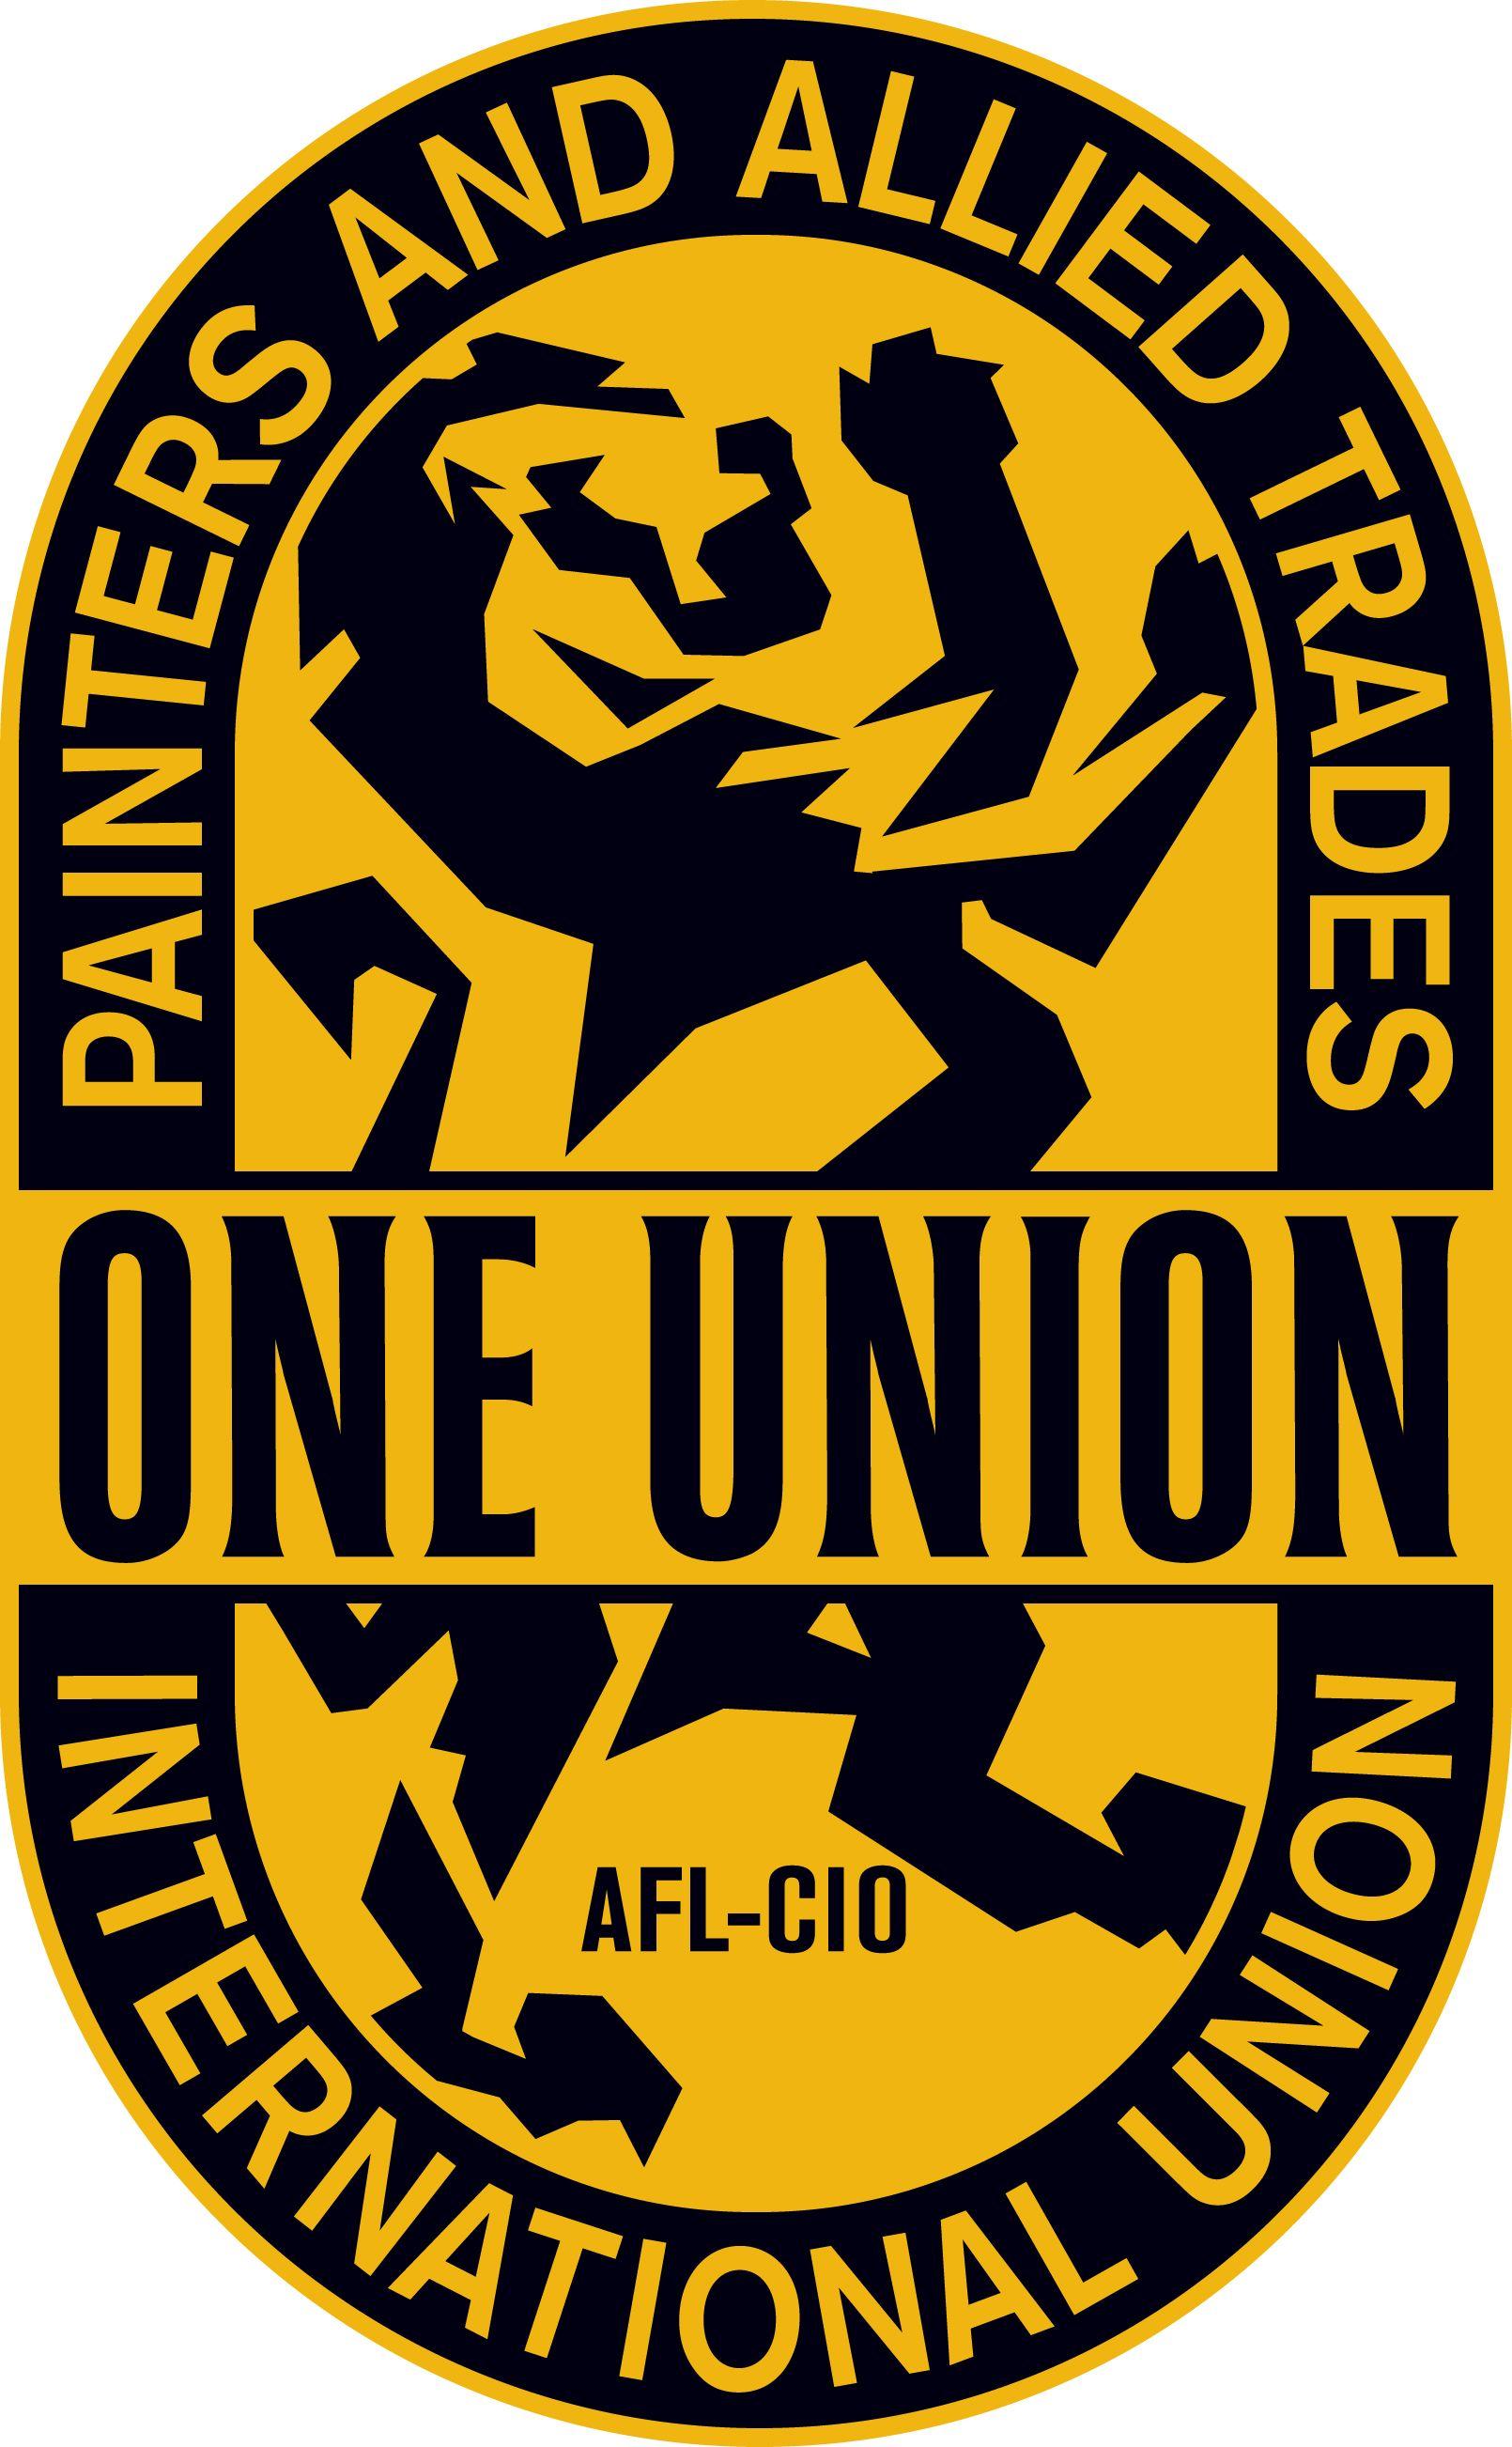 UAW Safety Logo - IUPAT - The International Union of Painters and Allied Trades